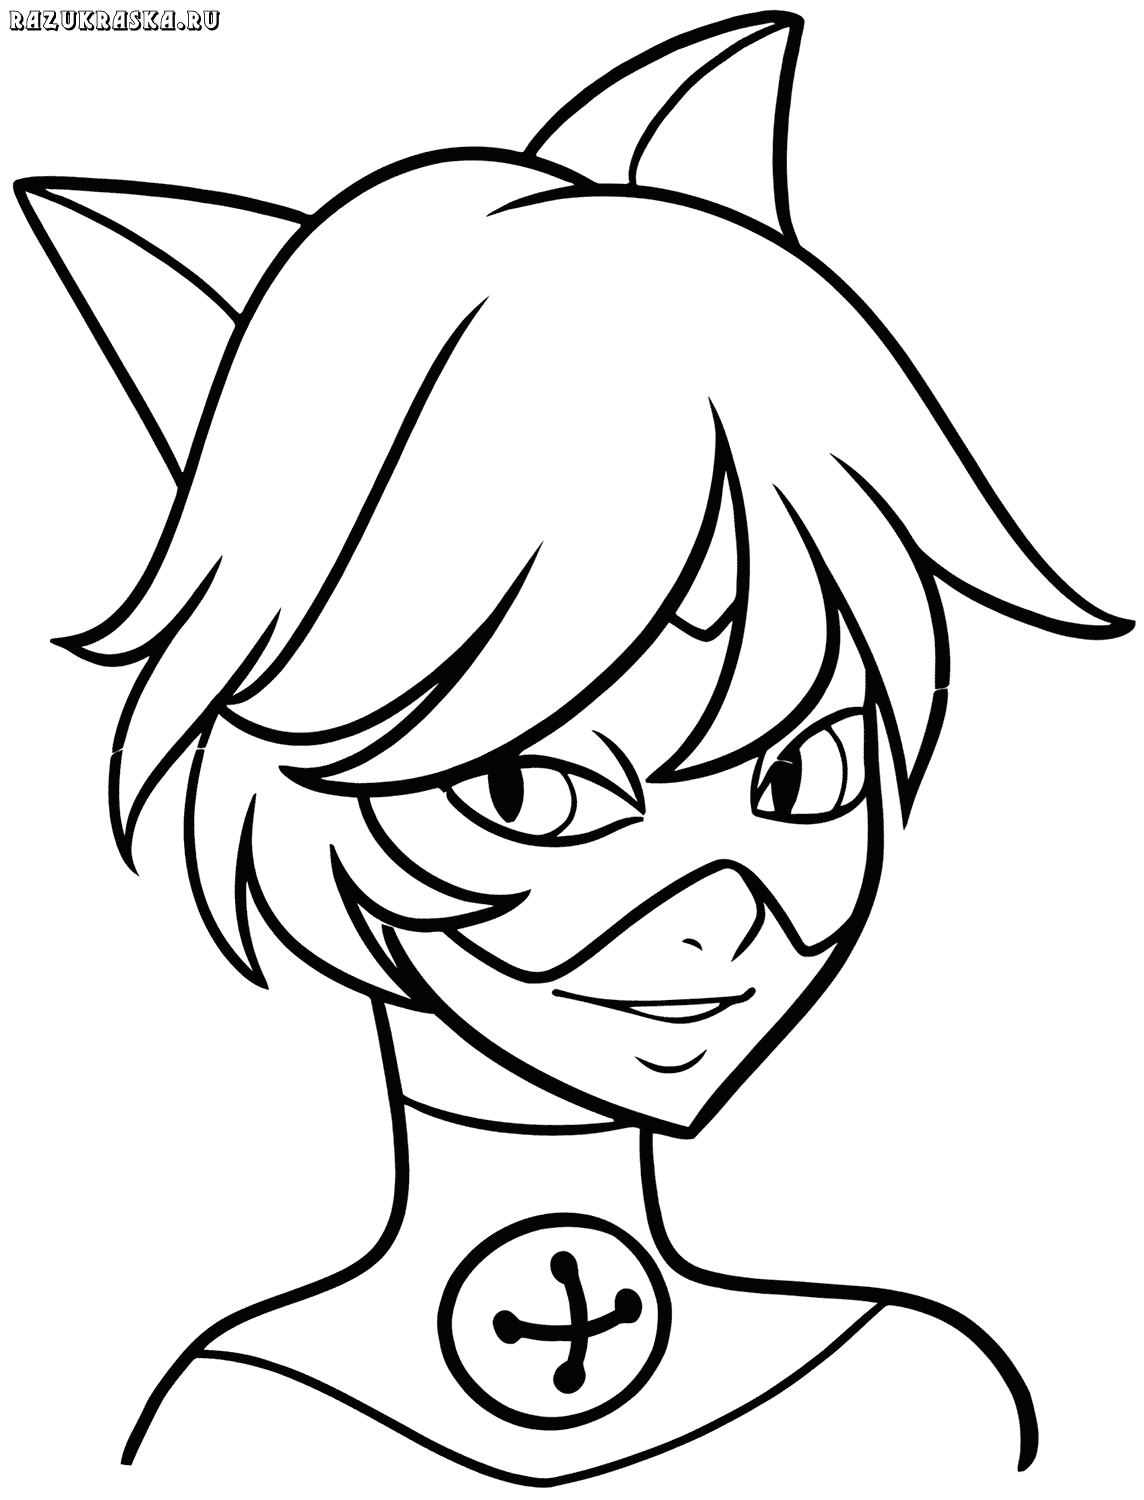 Download Cat Noir Coloring pages 🖌 to print and color